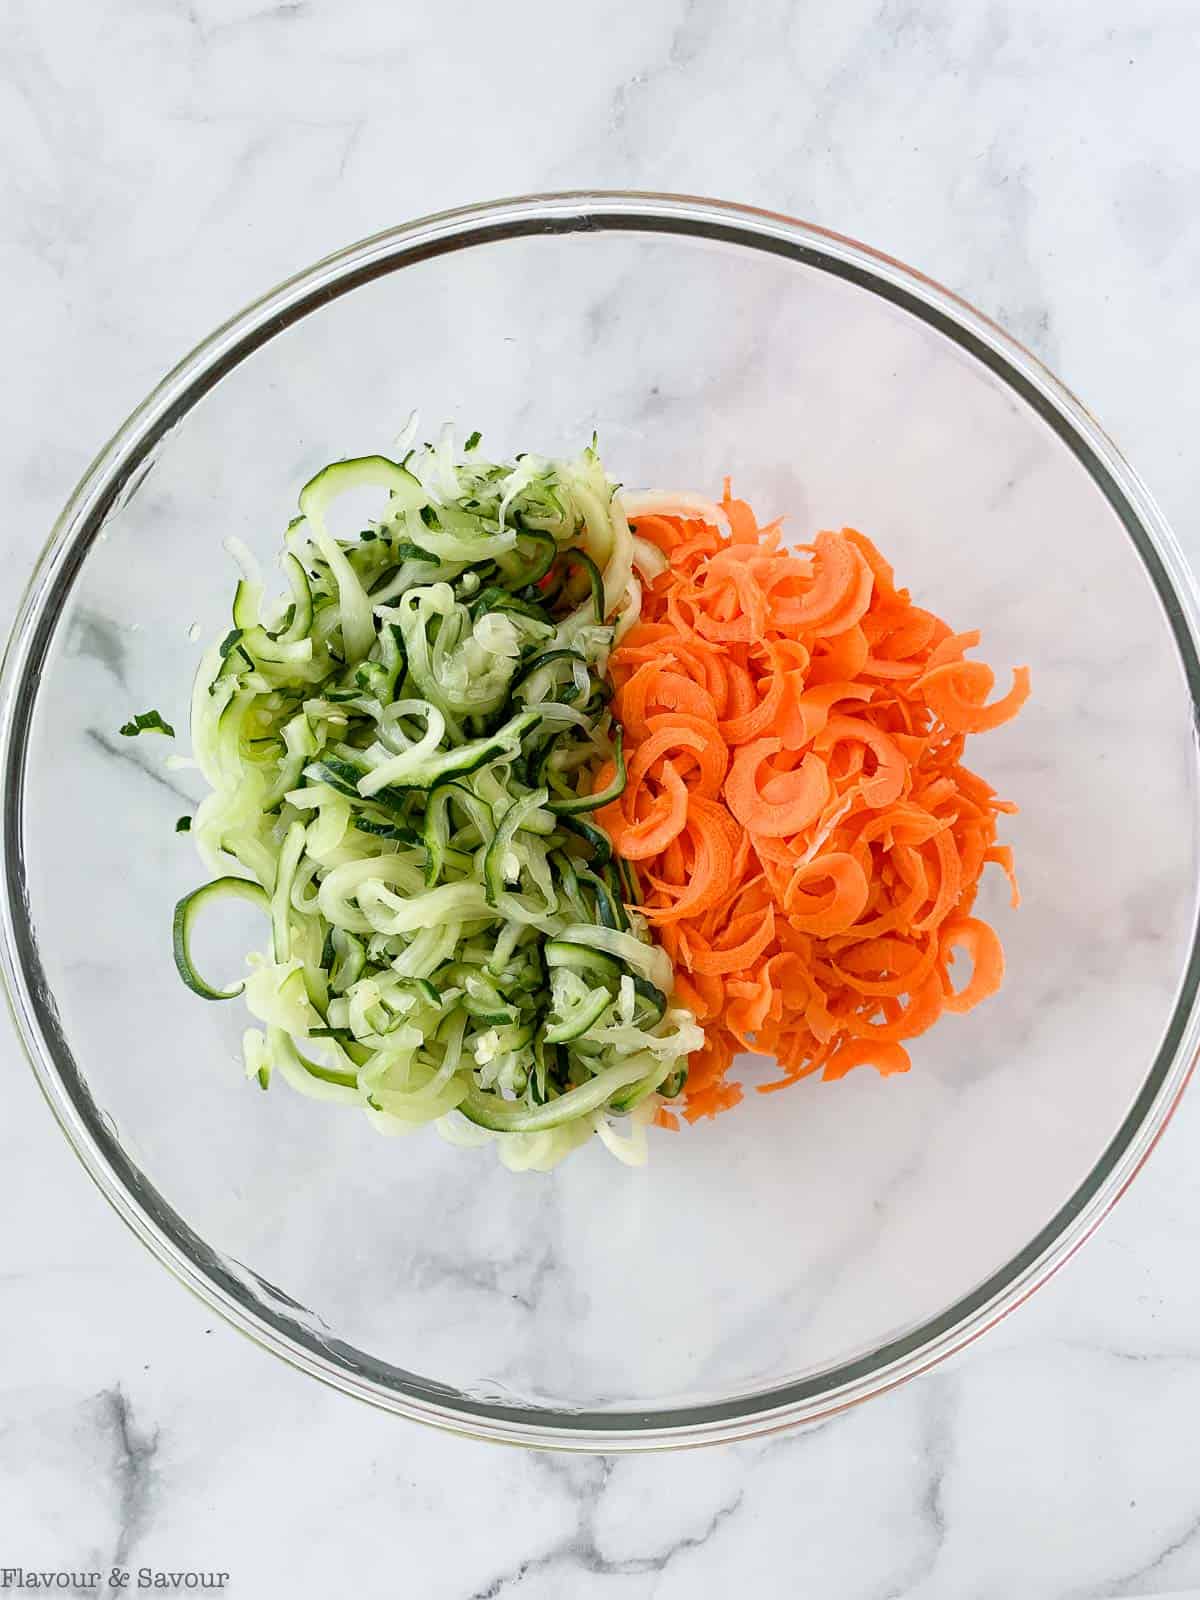 Spiralized zucchini and carrots in a bowl.